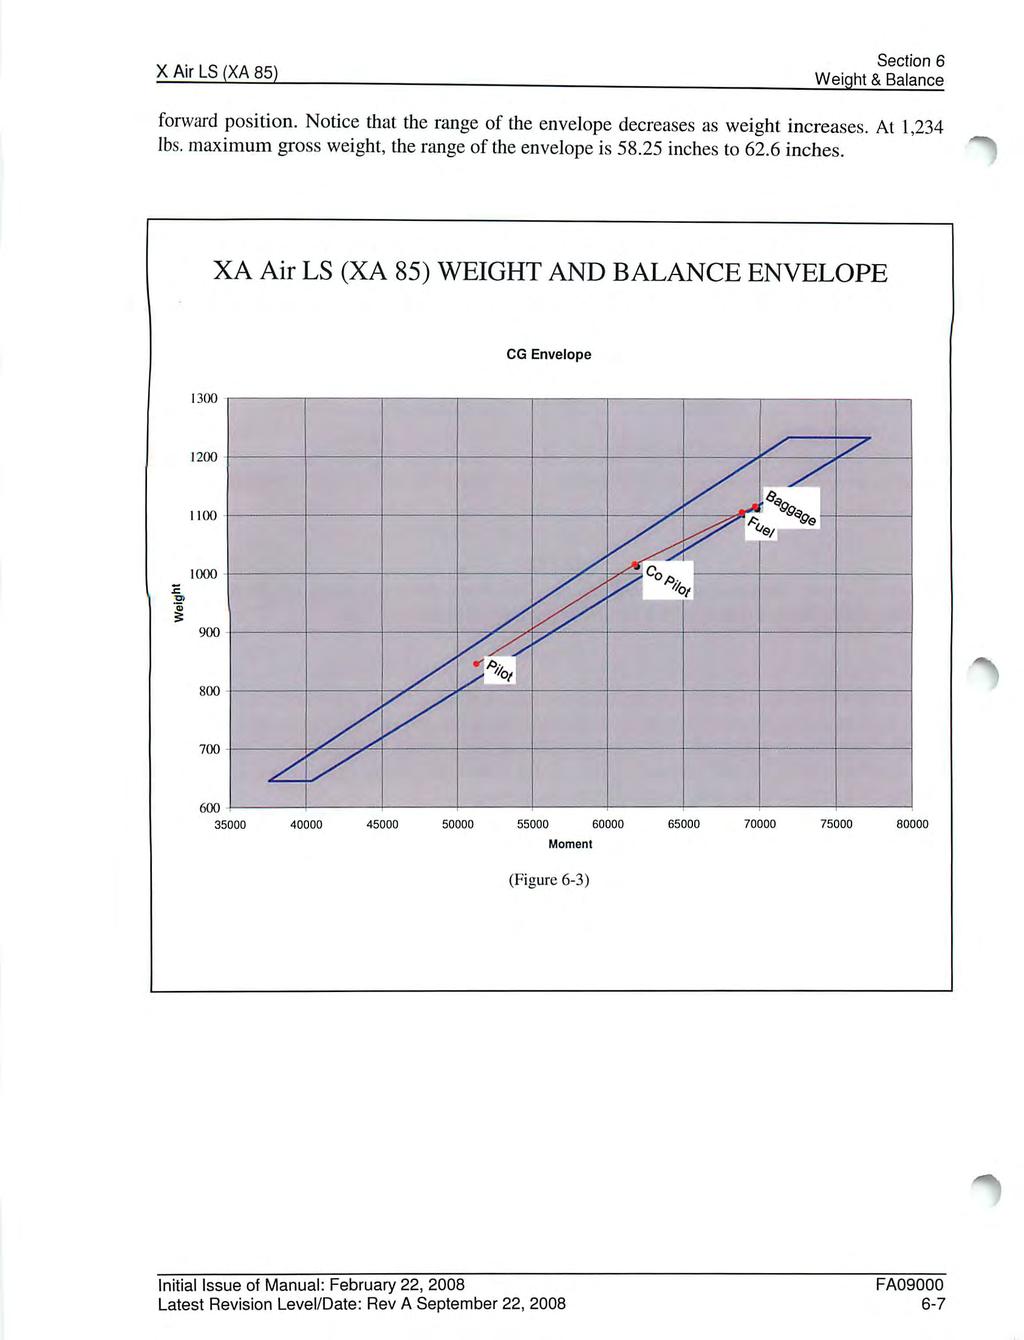 X Air LS (XA 85) Section 6 Weight & Balance forward position. Notice that the range of the envelope decreases as weight increases. At 1,234 lbs. maximum gross weight, the range of the envelope is 58.